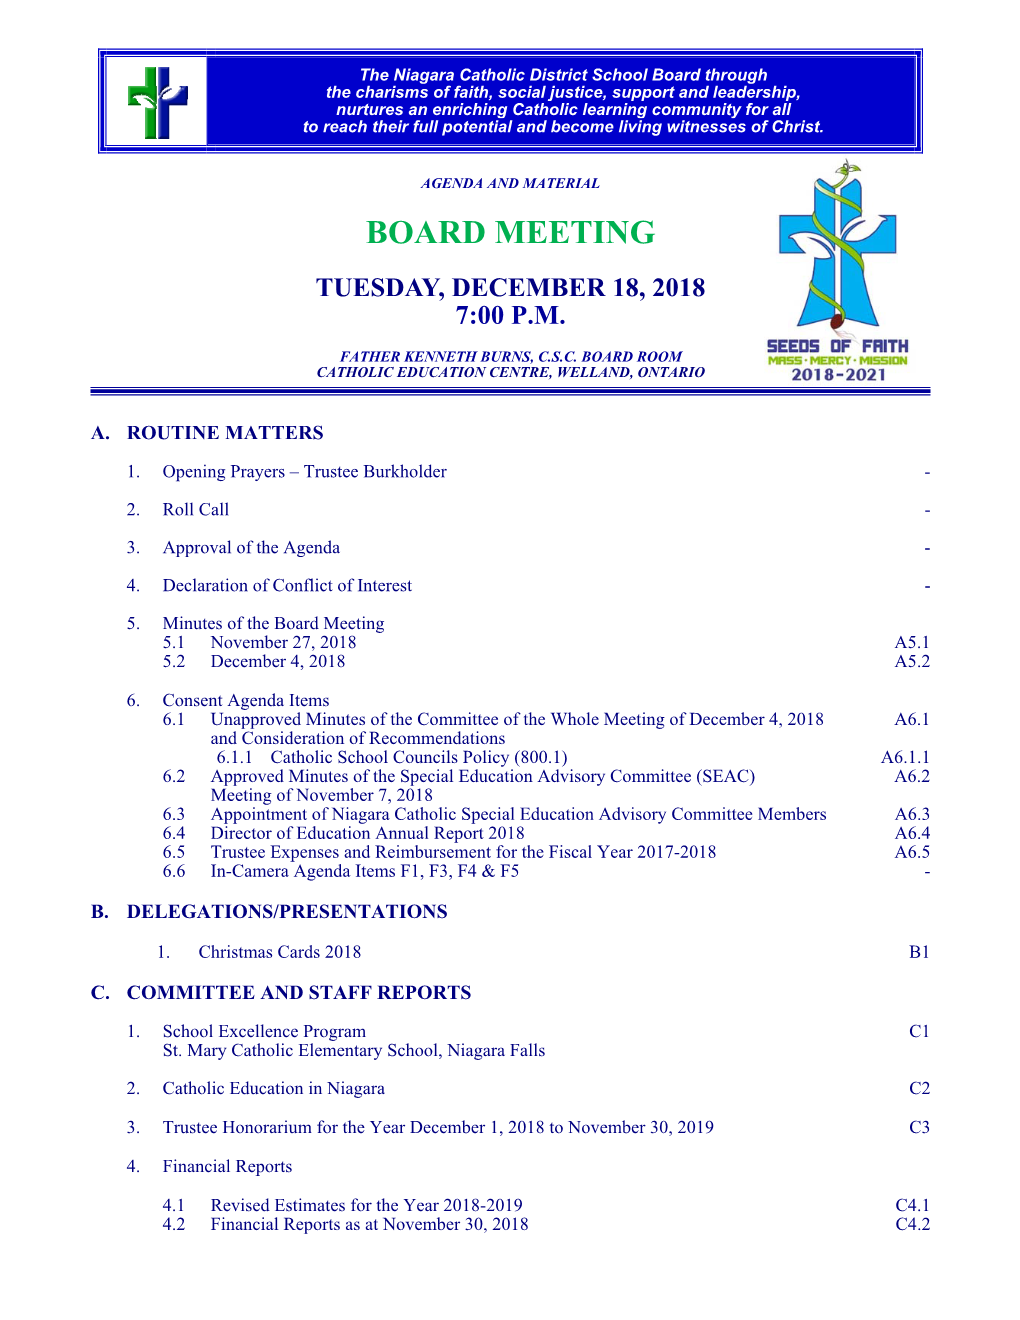 Board Meeting Tuesday, December 18, 2018 7:00 P.M